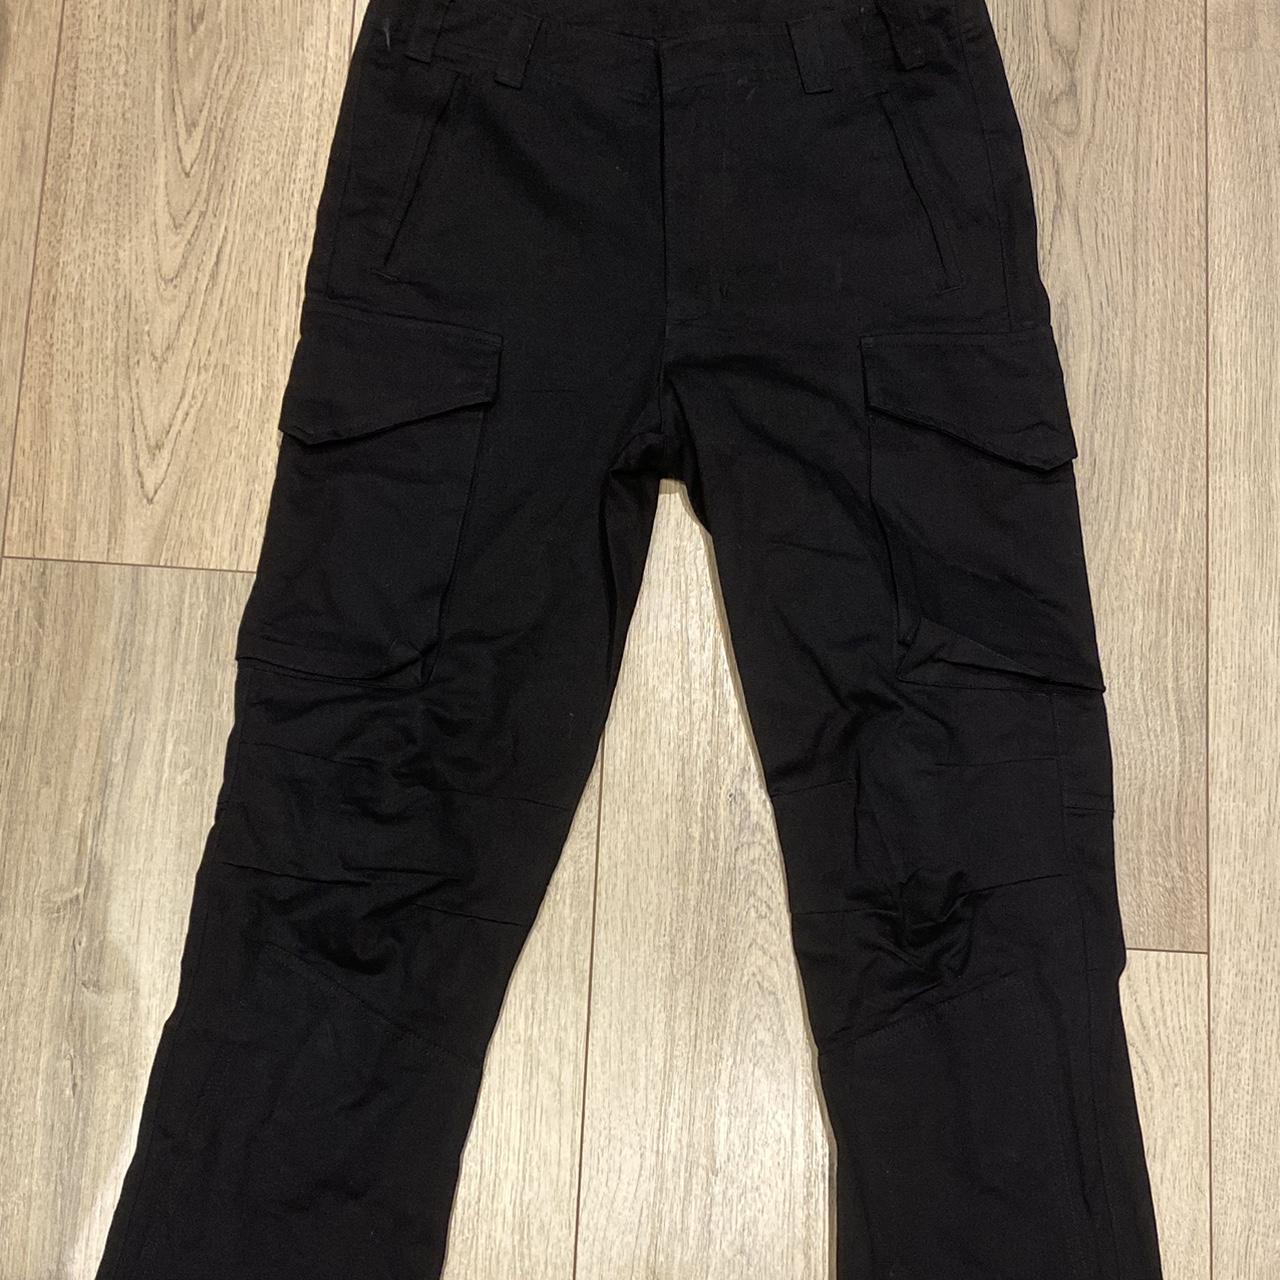 rick owens inspired trousers - just to make it clear... - Depop